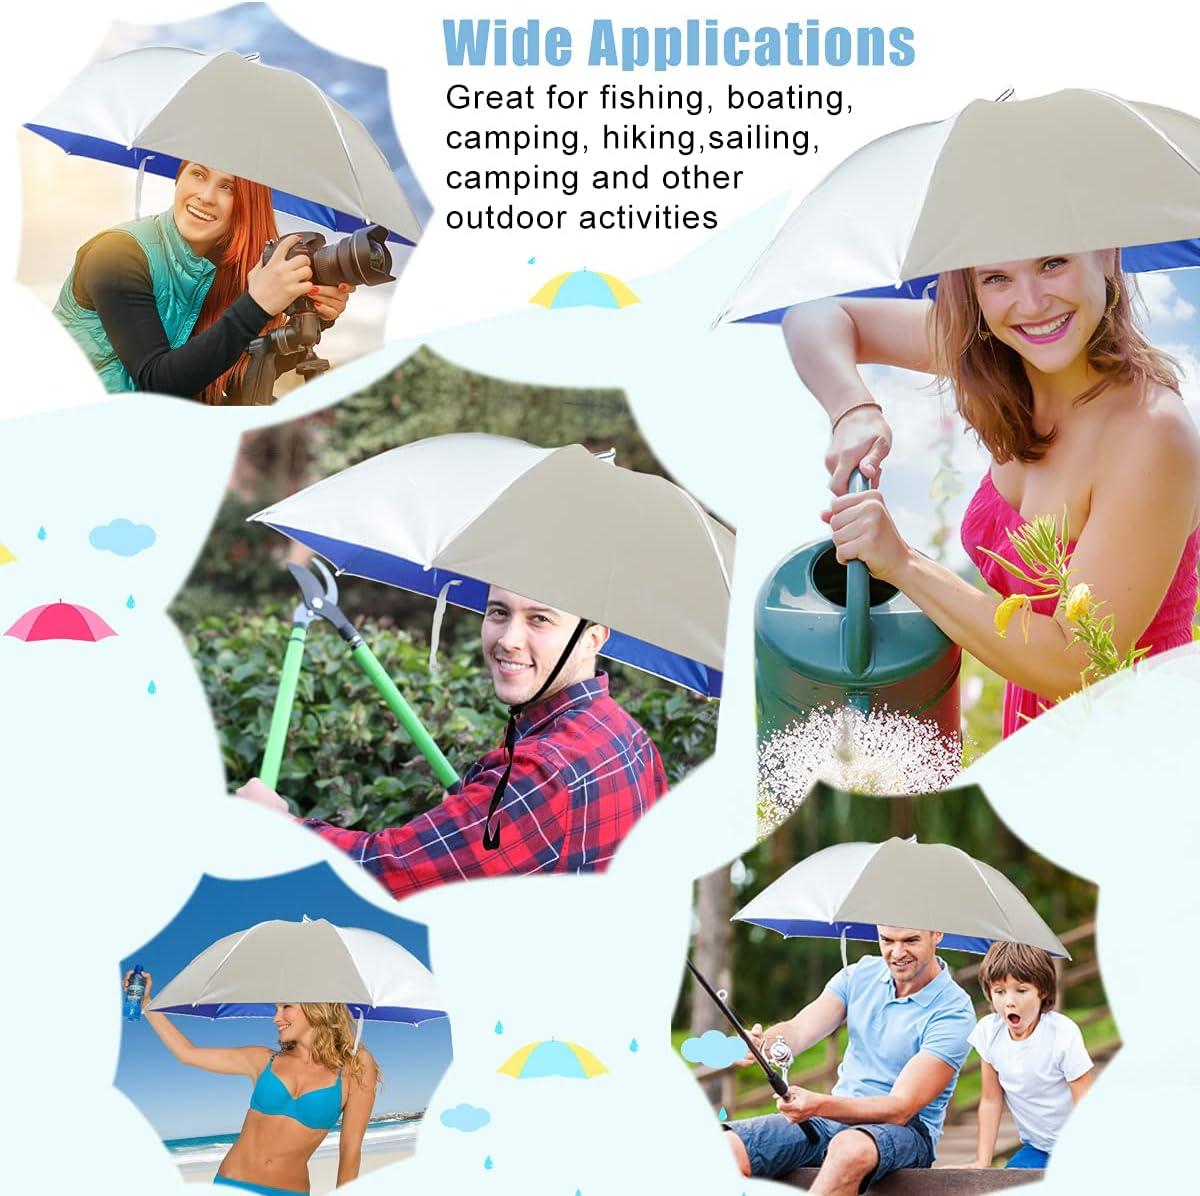 Qukipet Umbrella Hat, 37 inch Fishing Umbrella Cap for Adults and Kids,  Elastic Folding Compact UV&Rain Protection Headwear for Fishing Golf  Gardening Outdoor Silver/Blue